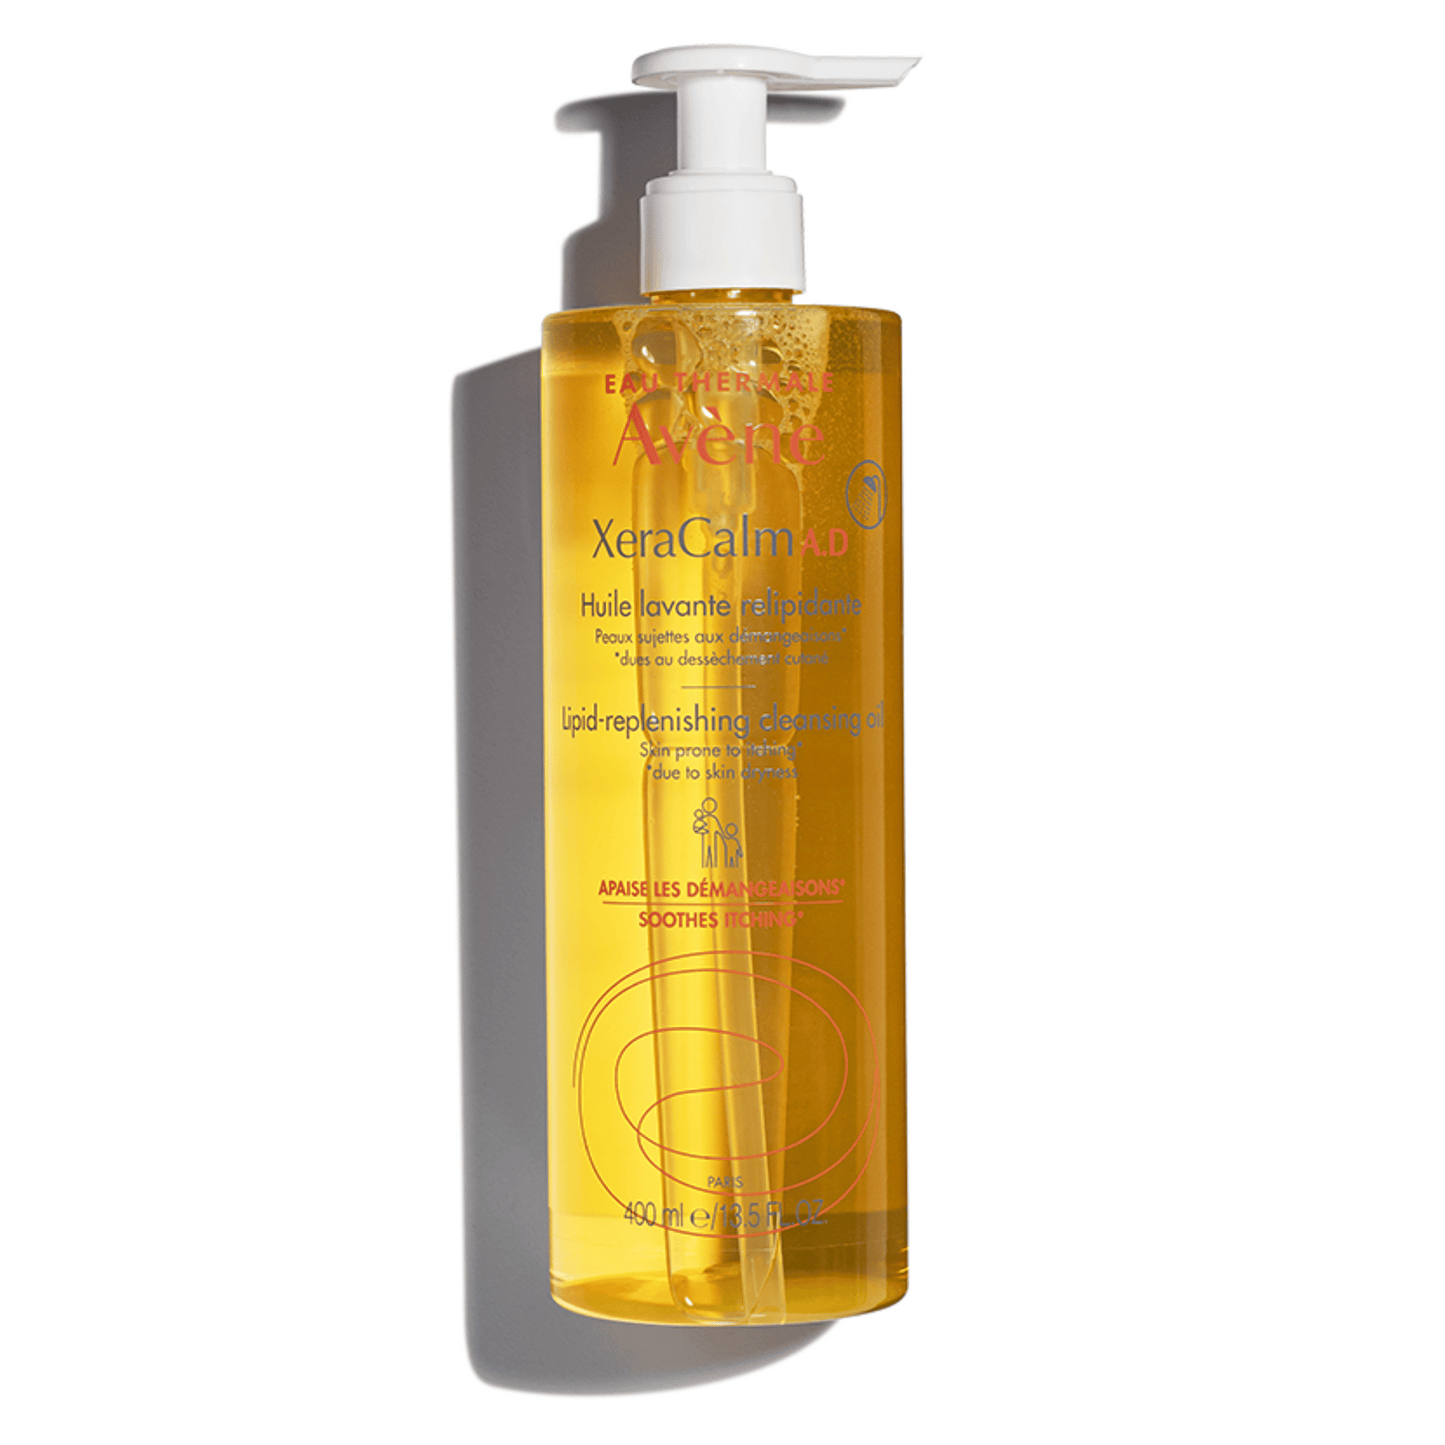 Primary Image of XeraCalm A.D Lipid-Replenishing Cleansing Oil